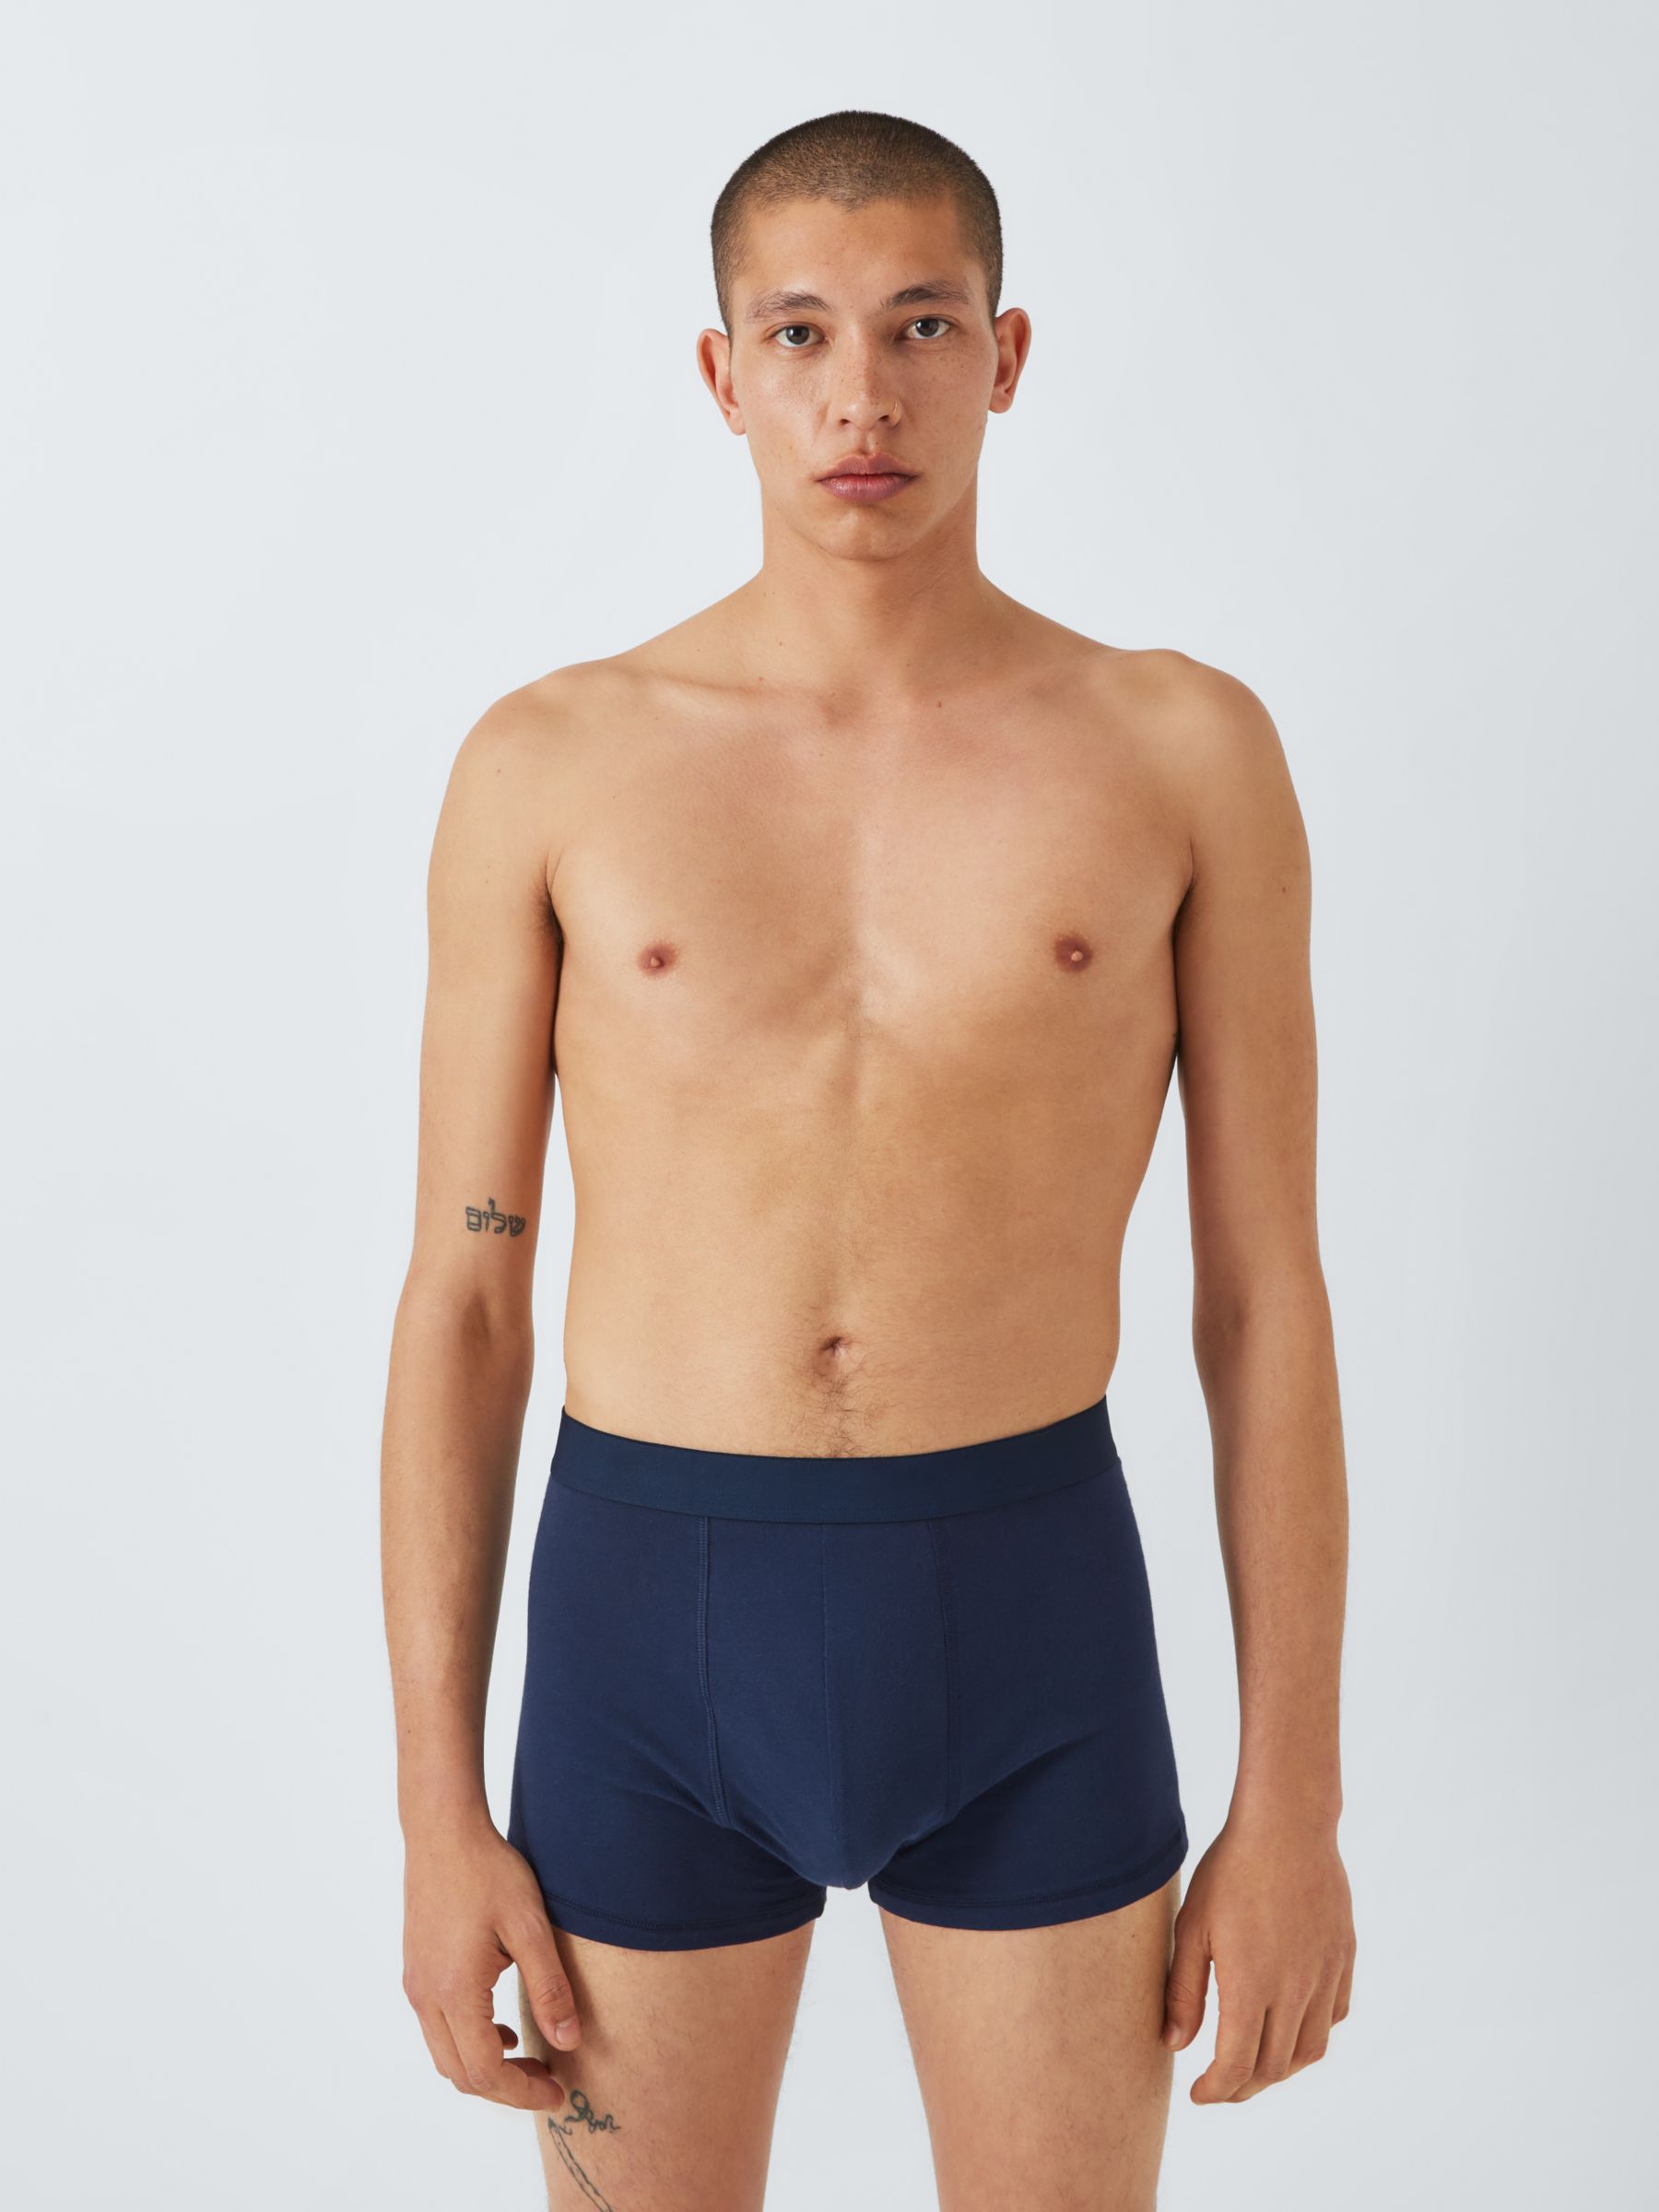 John Lewis ANYDAY Cotton Trunks, Pack of 5, Multi, XL